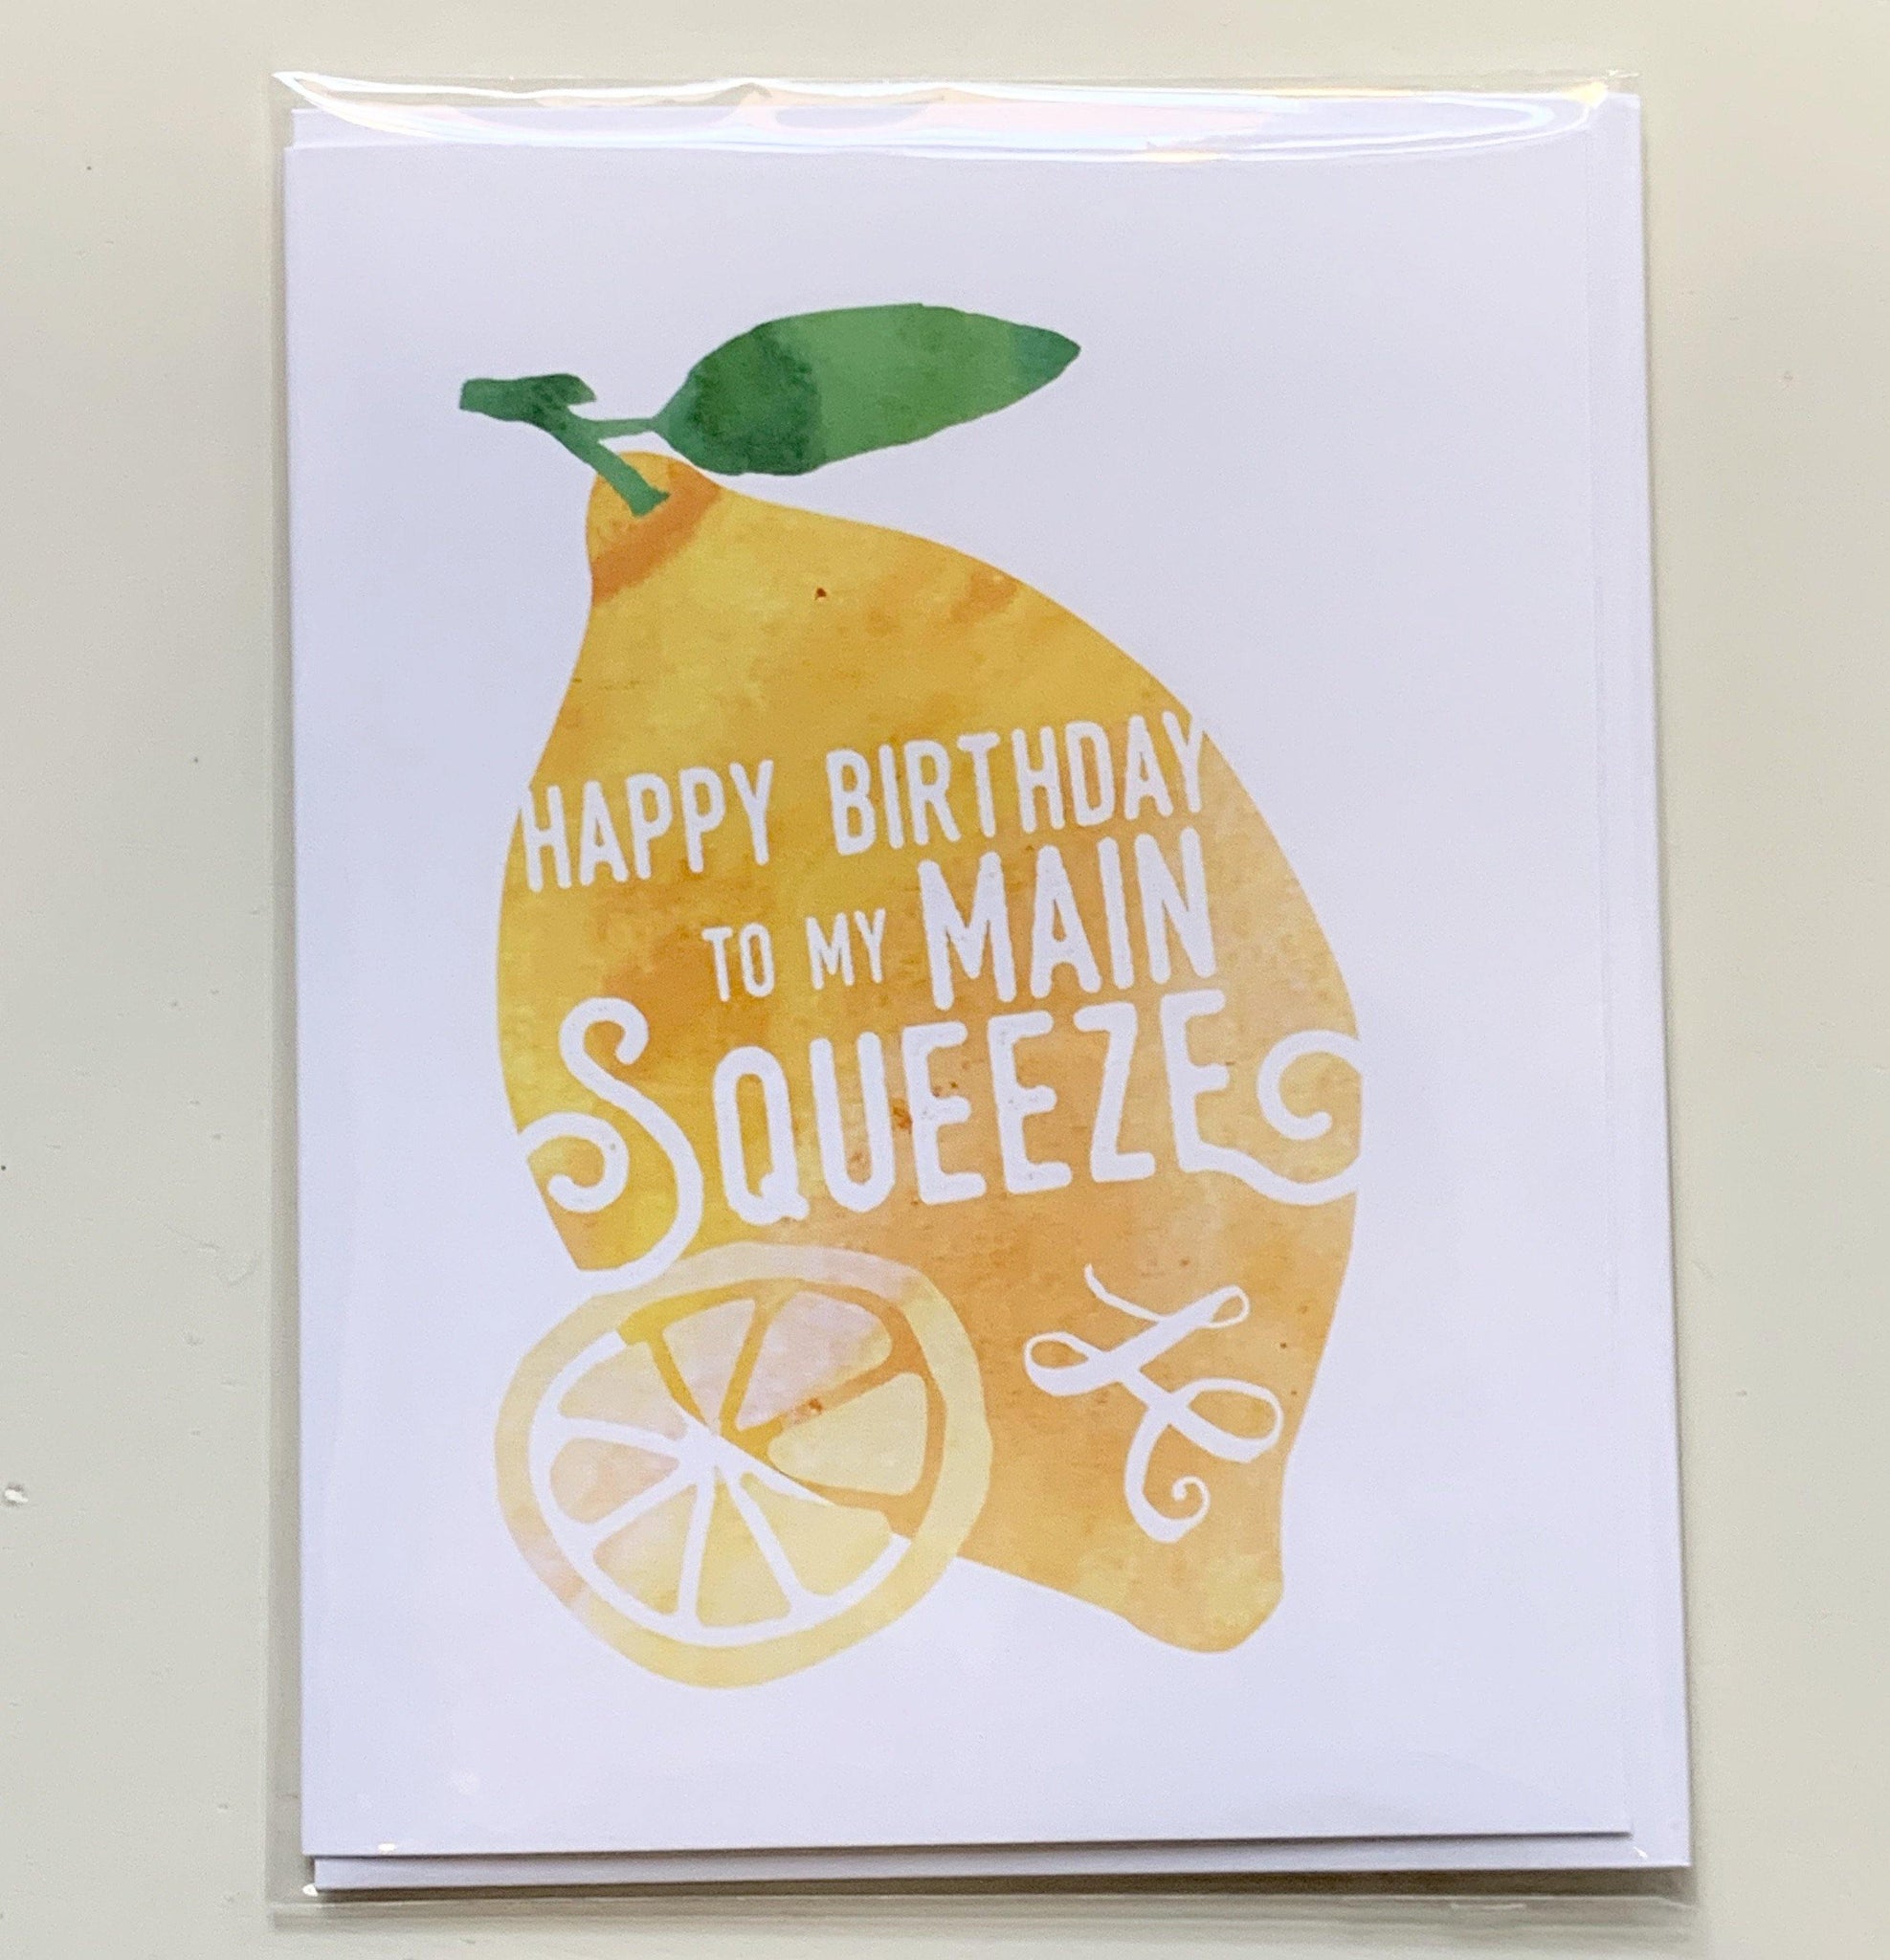 Maine Squeeze Birthday Greeting Card - Revival Phl